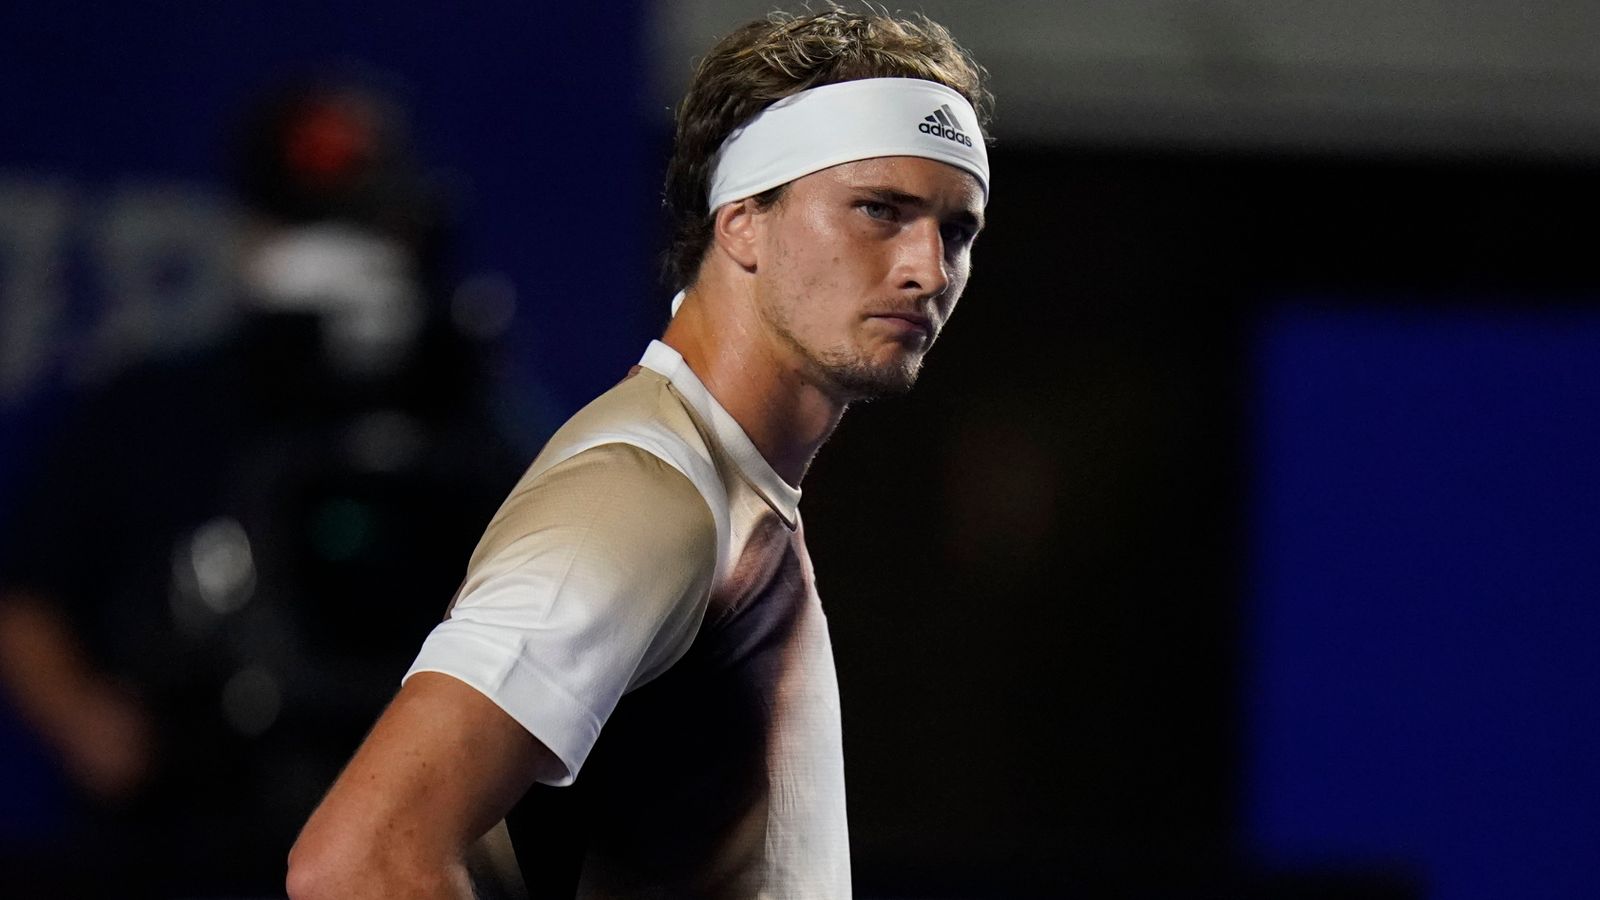 Alexander Zverev and Jenson Brooksby create history in Acapulco with  latest-ever finish to professional match | Tennis News | Sky Sports